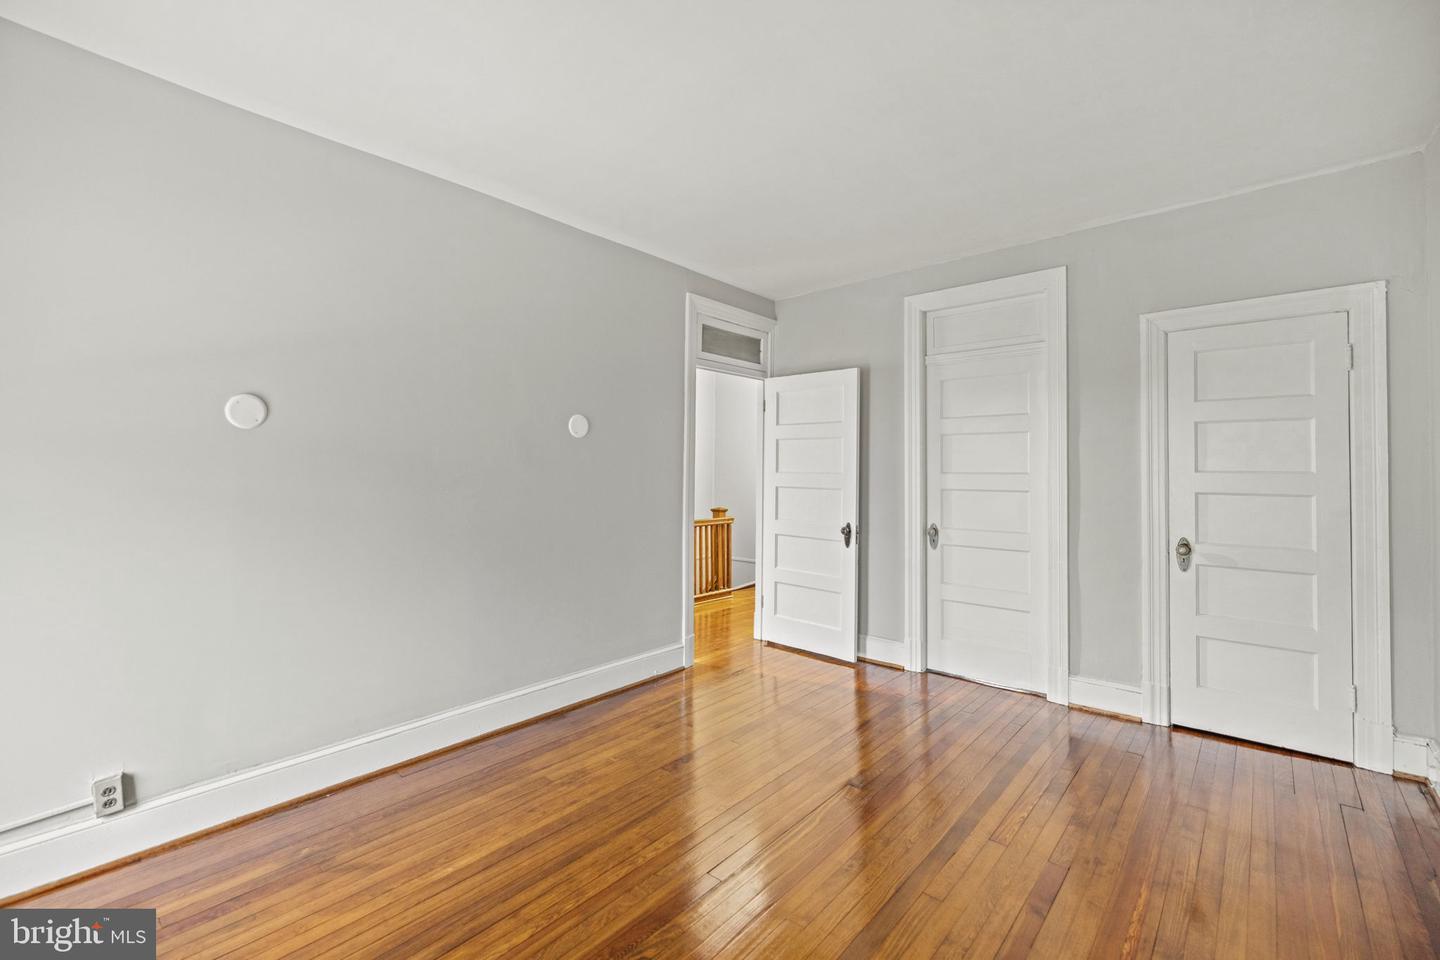 30 W Street NW, Washington, District Of Columbia, 20001, United States, 3 Bedrooms Bedrooms, ,2 BathroomsBathrooms,Residential,For Sale,30 W Street NW,1498717